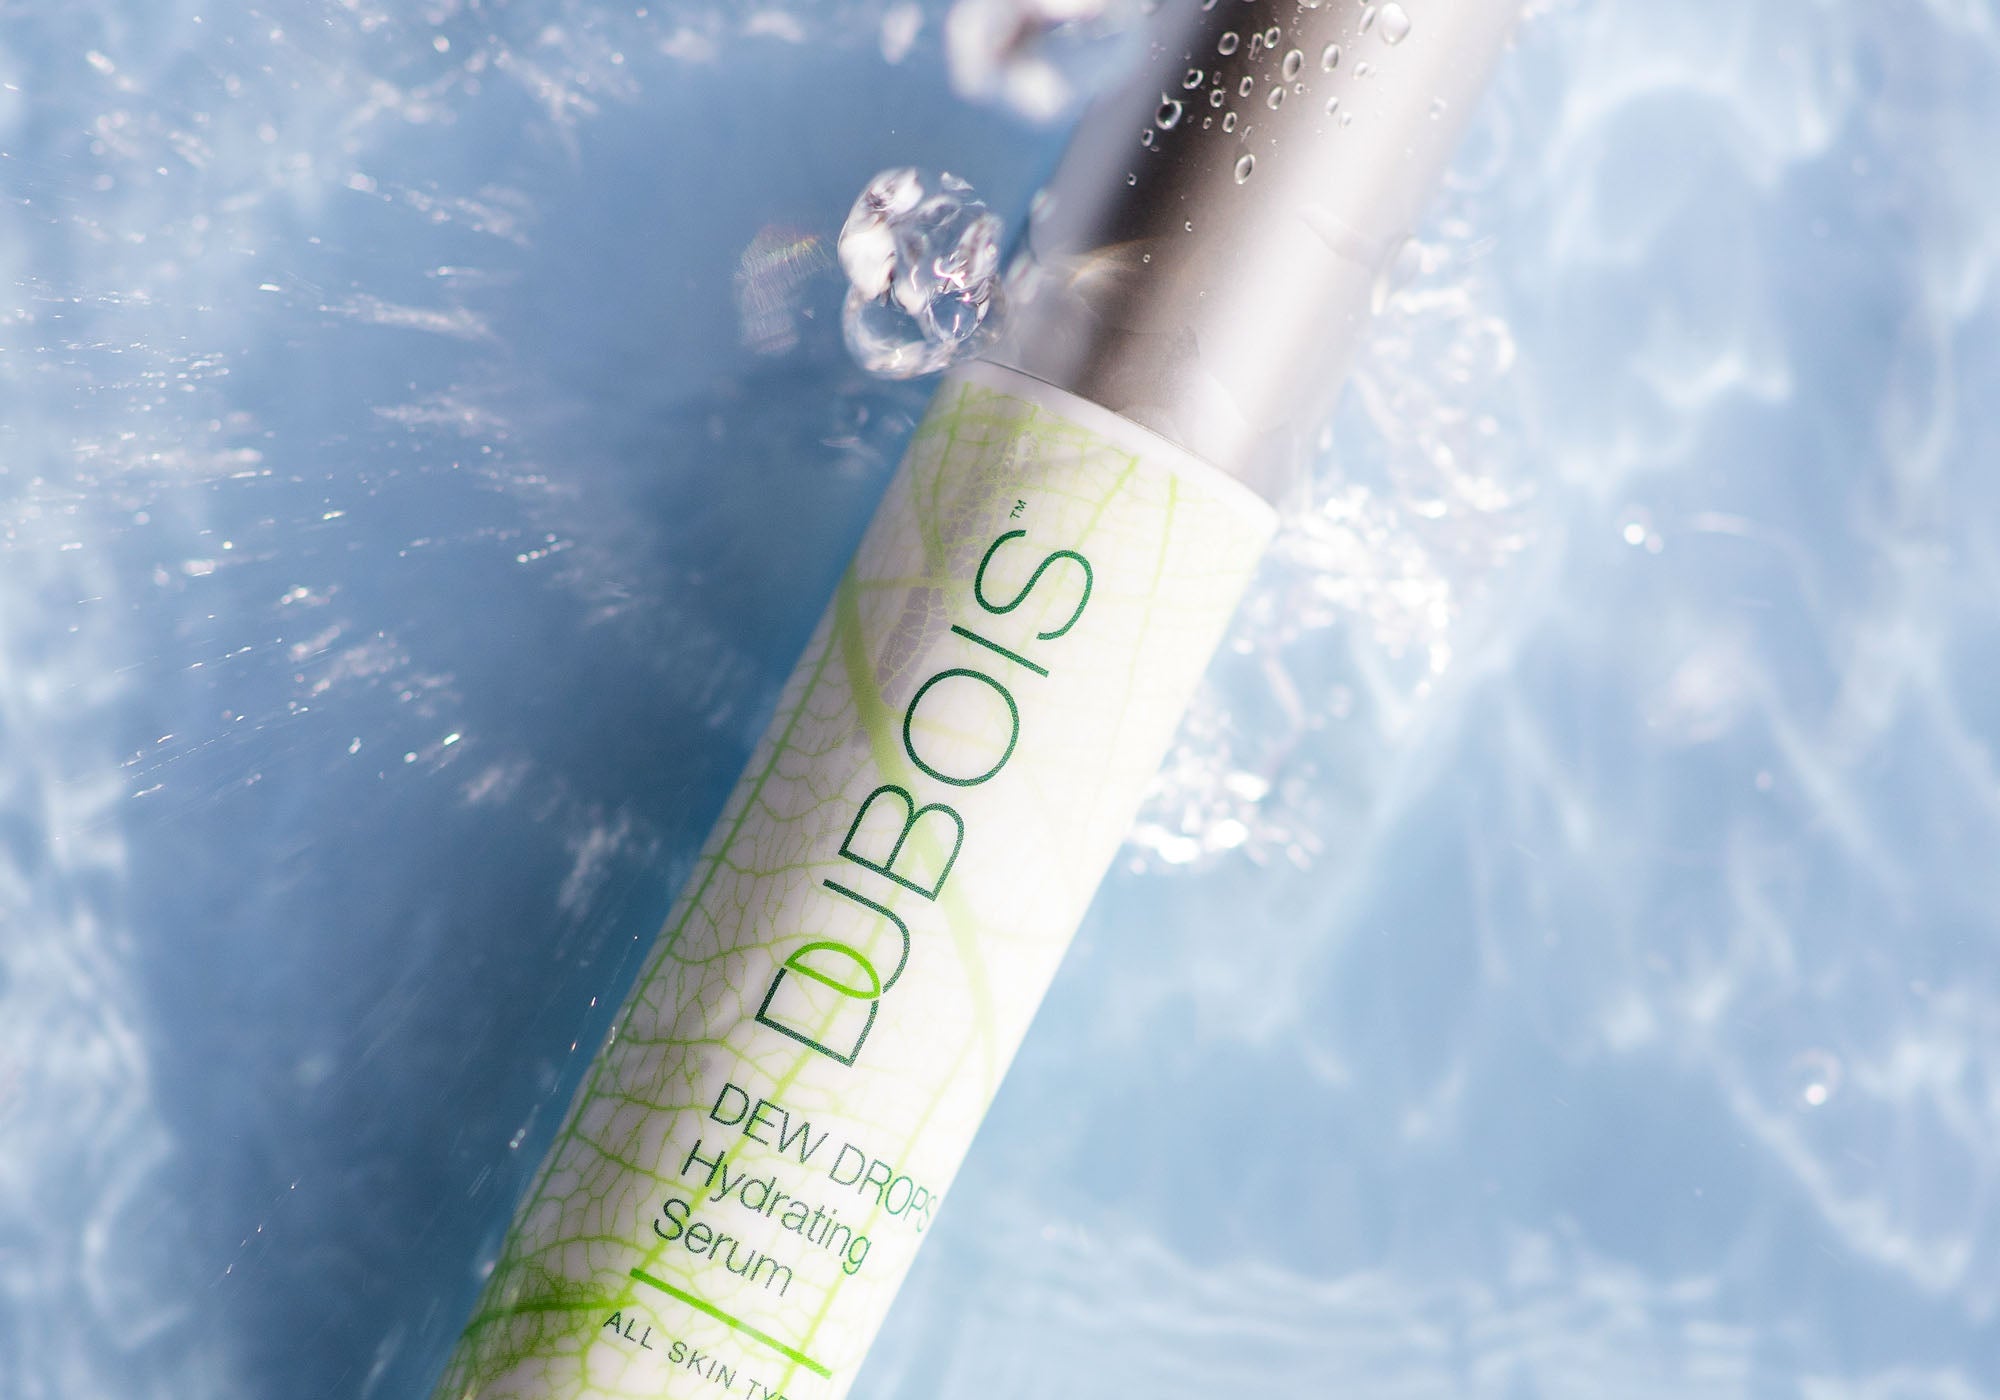 Tube of Dew Drops Hydrating Serum falling into water with water drops